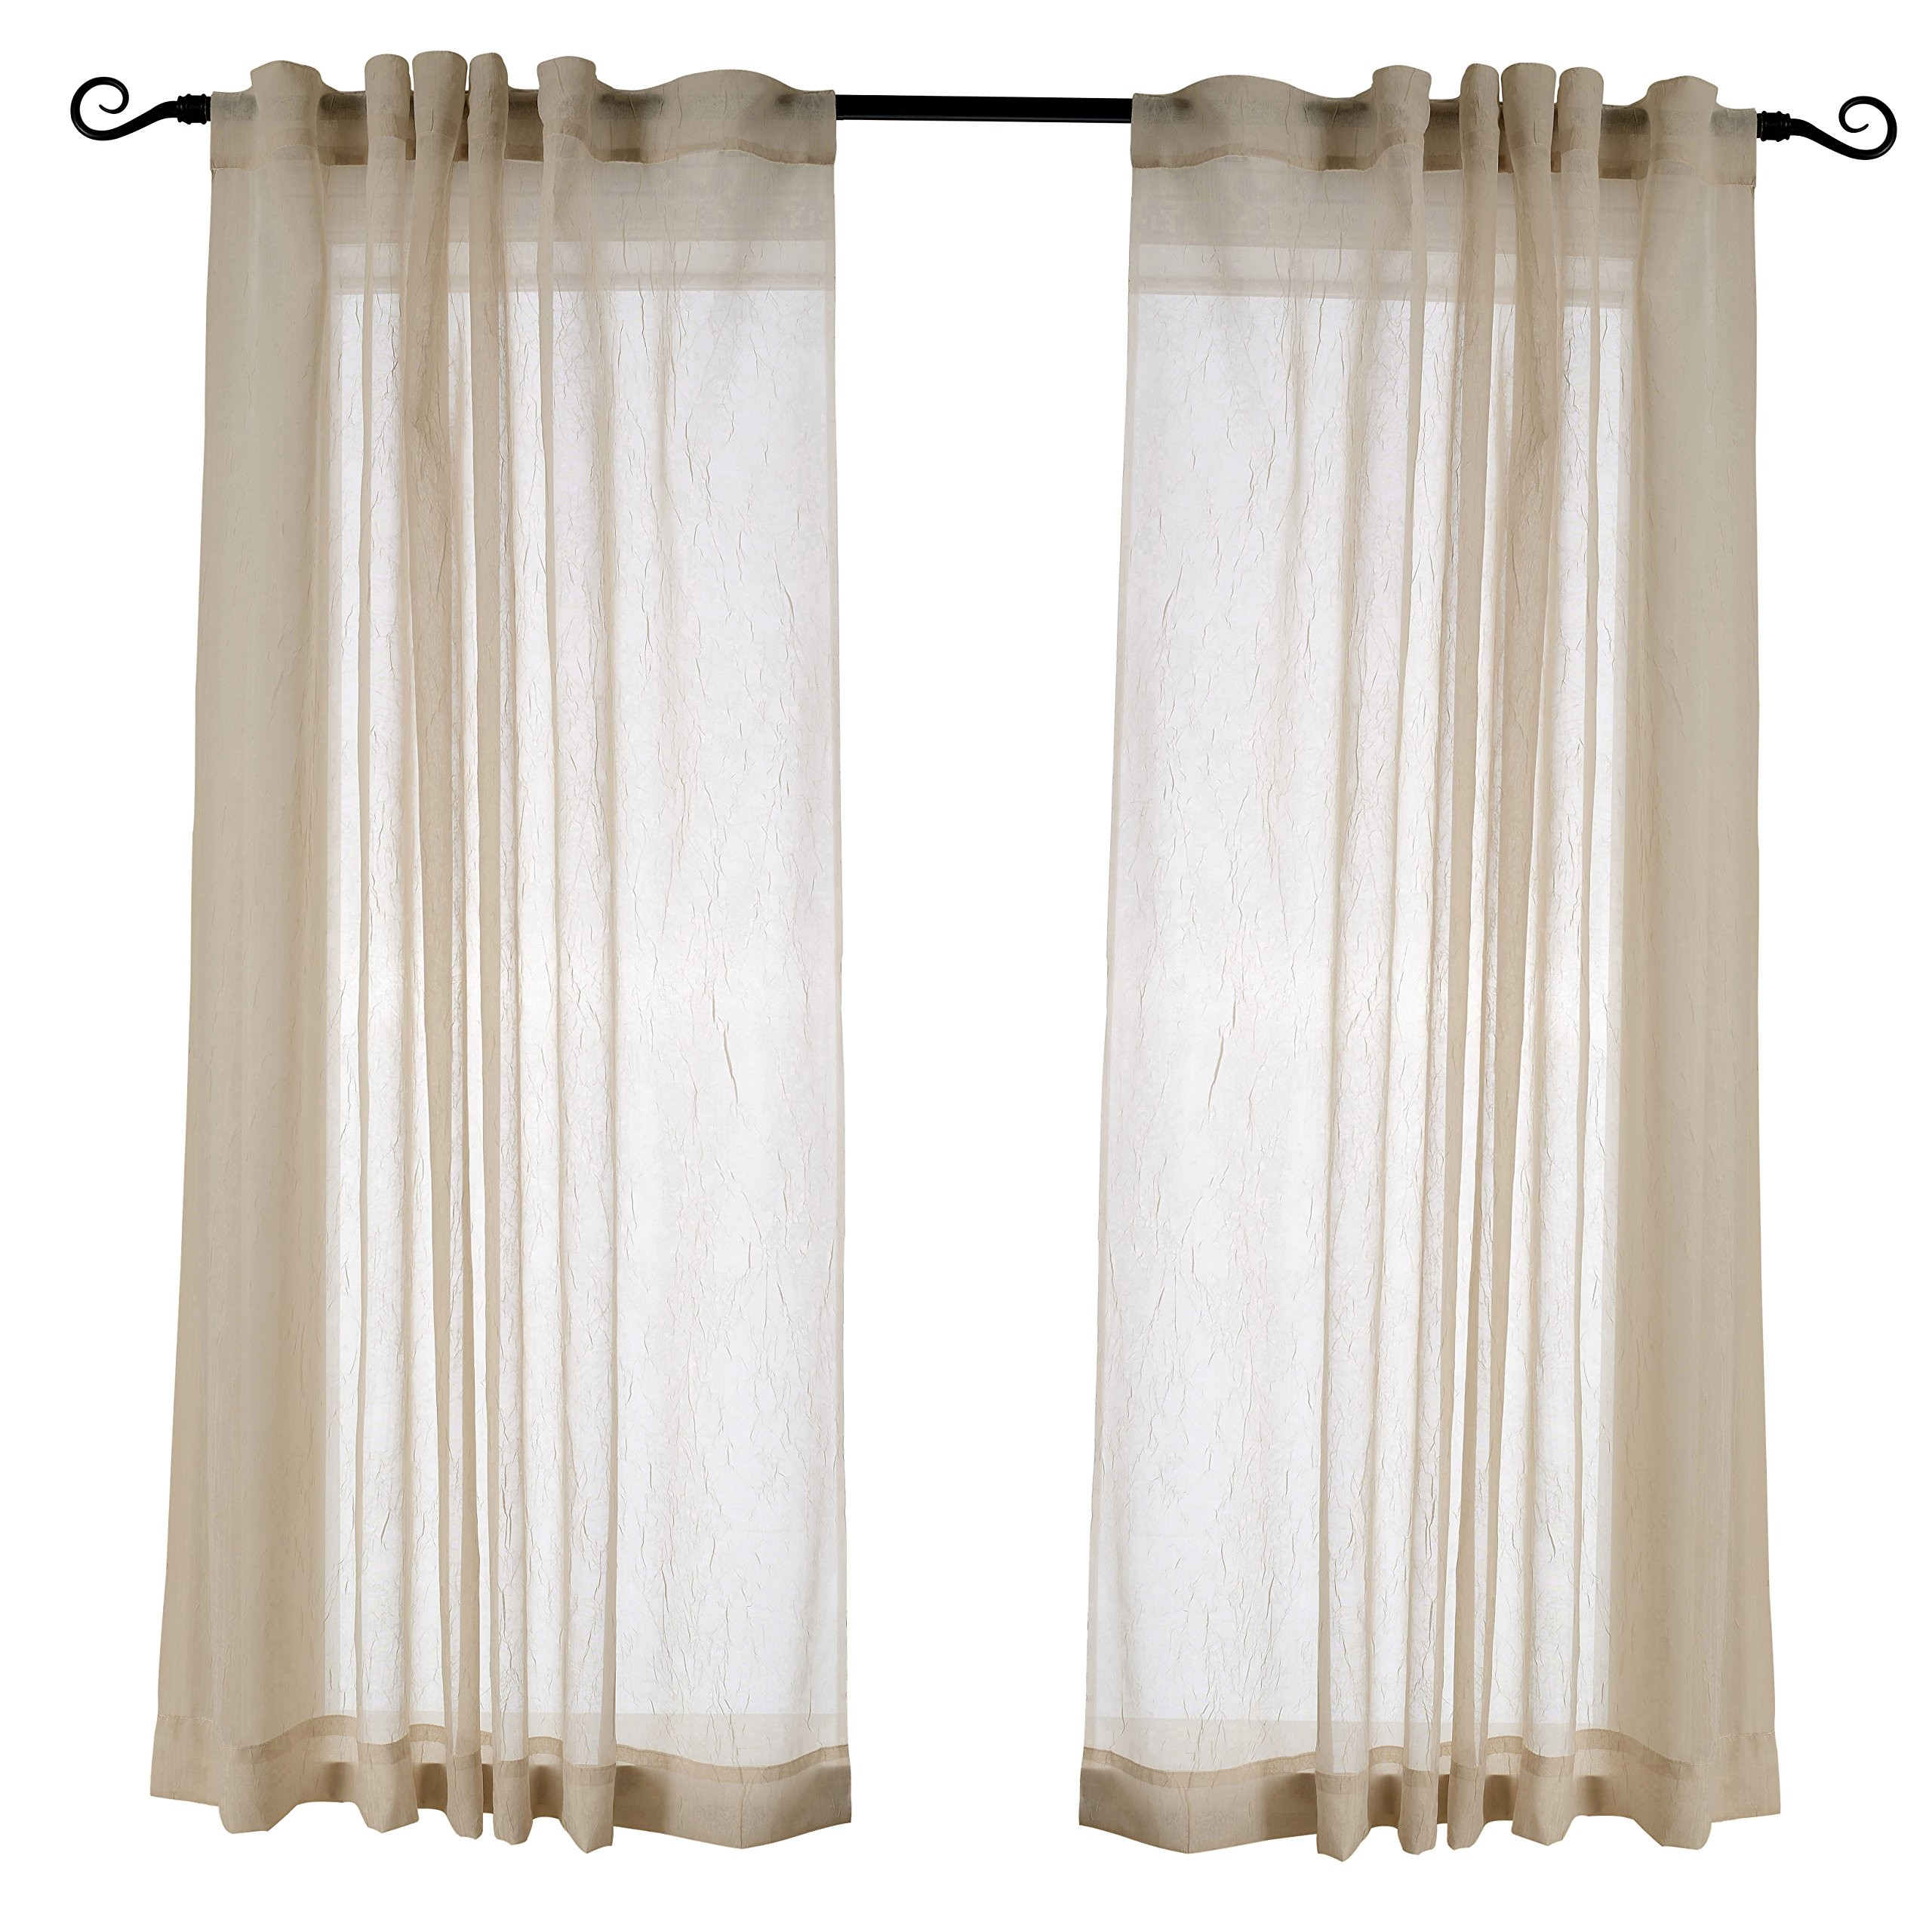 Living Room Curtains Amazon
 Living Room Sheer Curtains Amazon